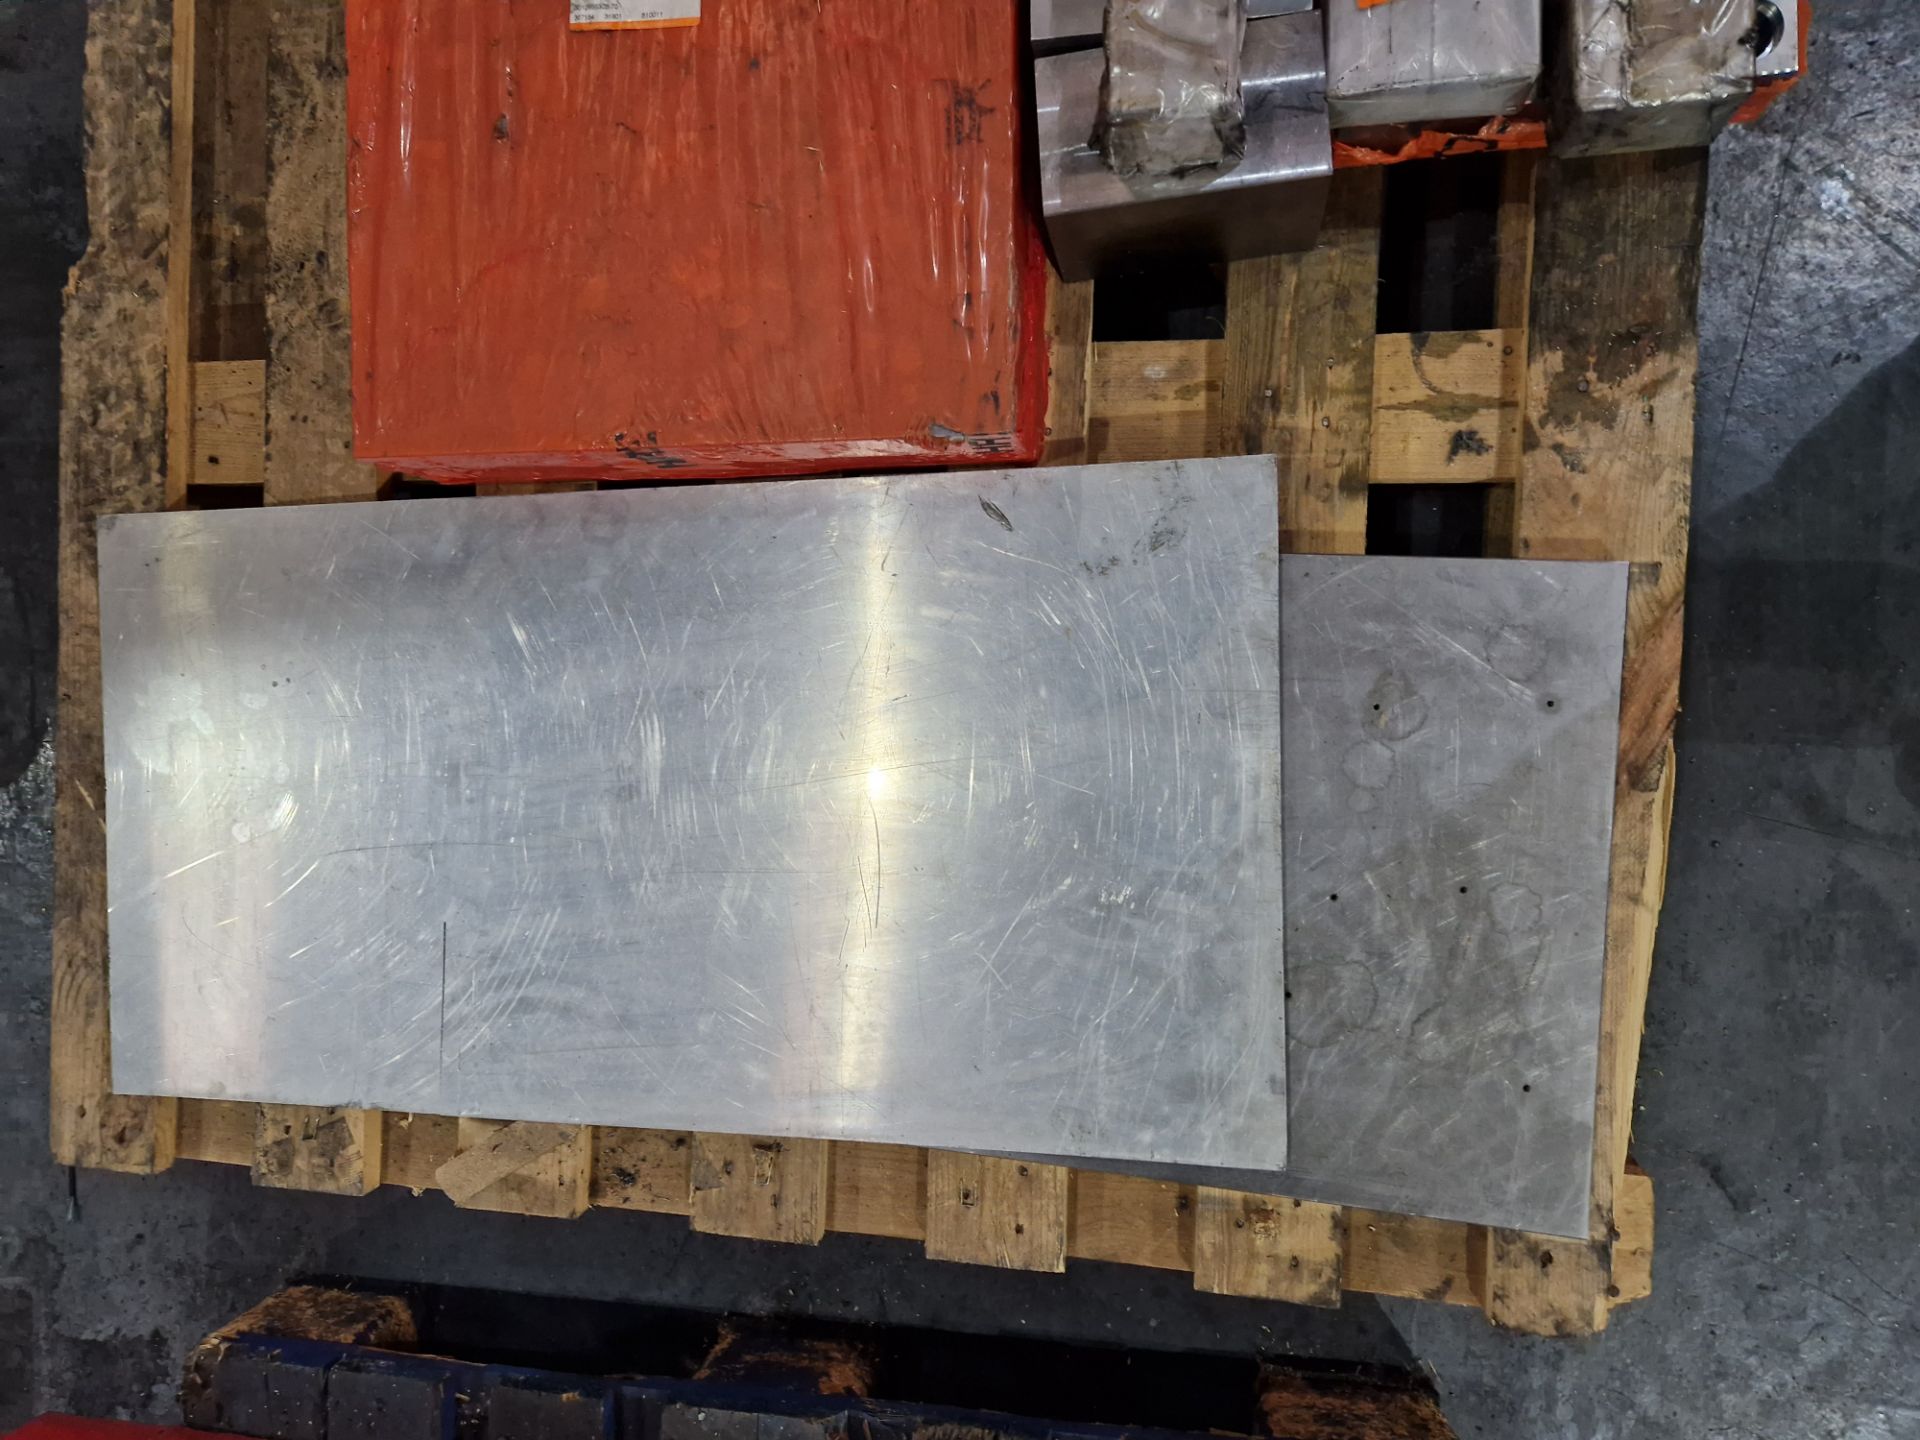 Pallet containing Four Blocks of H13 Steel, HASCO MS43383 Mild Steel, HASCO Steel Blocks, - Image 4 of 4